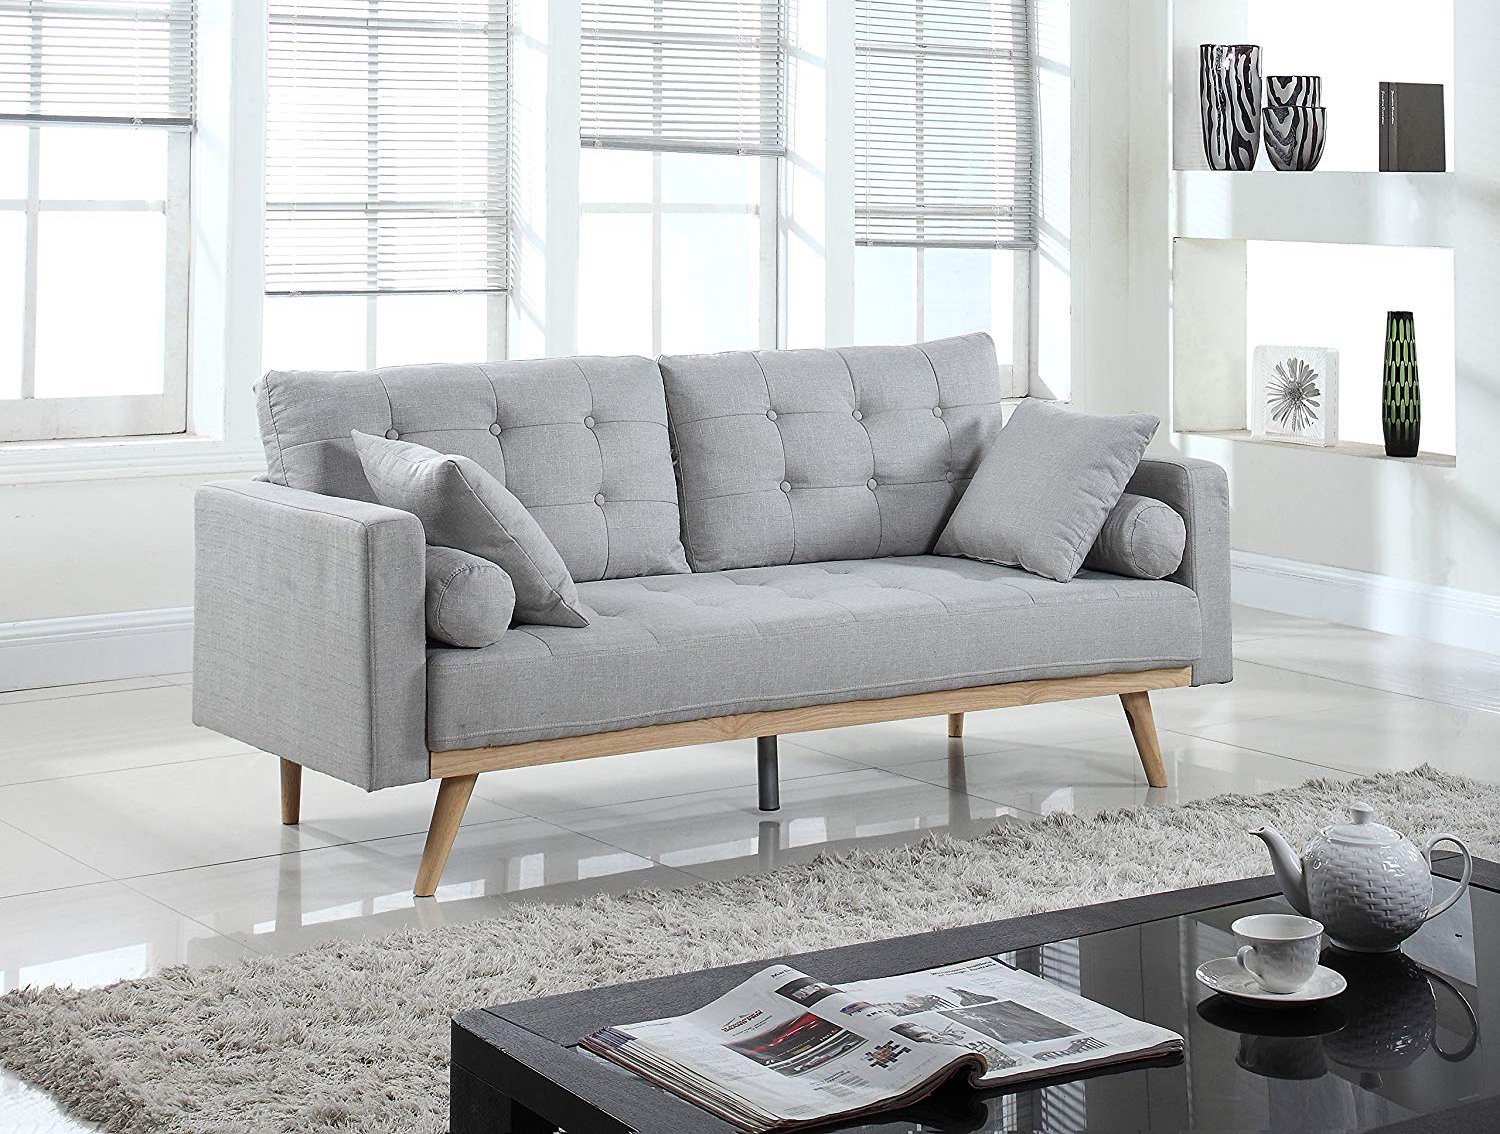 These ‘Leggy’ Sofas Are Perfect For Small Living Rooms